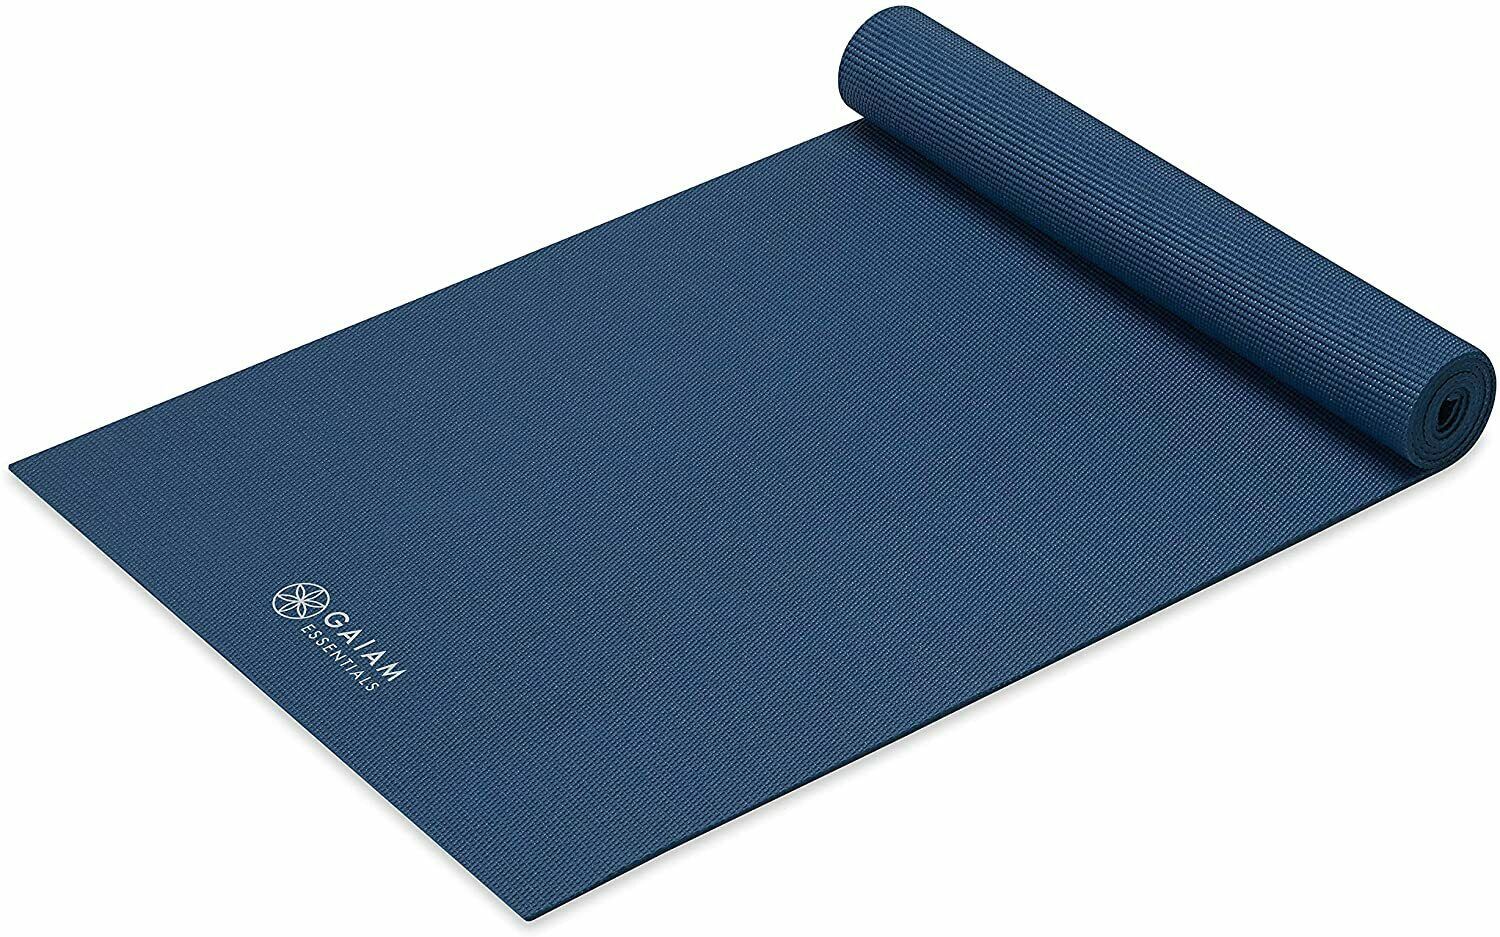 GAIAM FOLDABLE YOGA Mat Super Compact Ultra Lightweight Icy